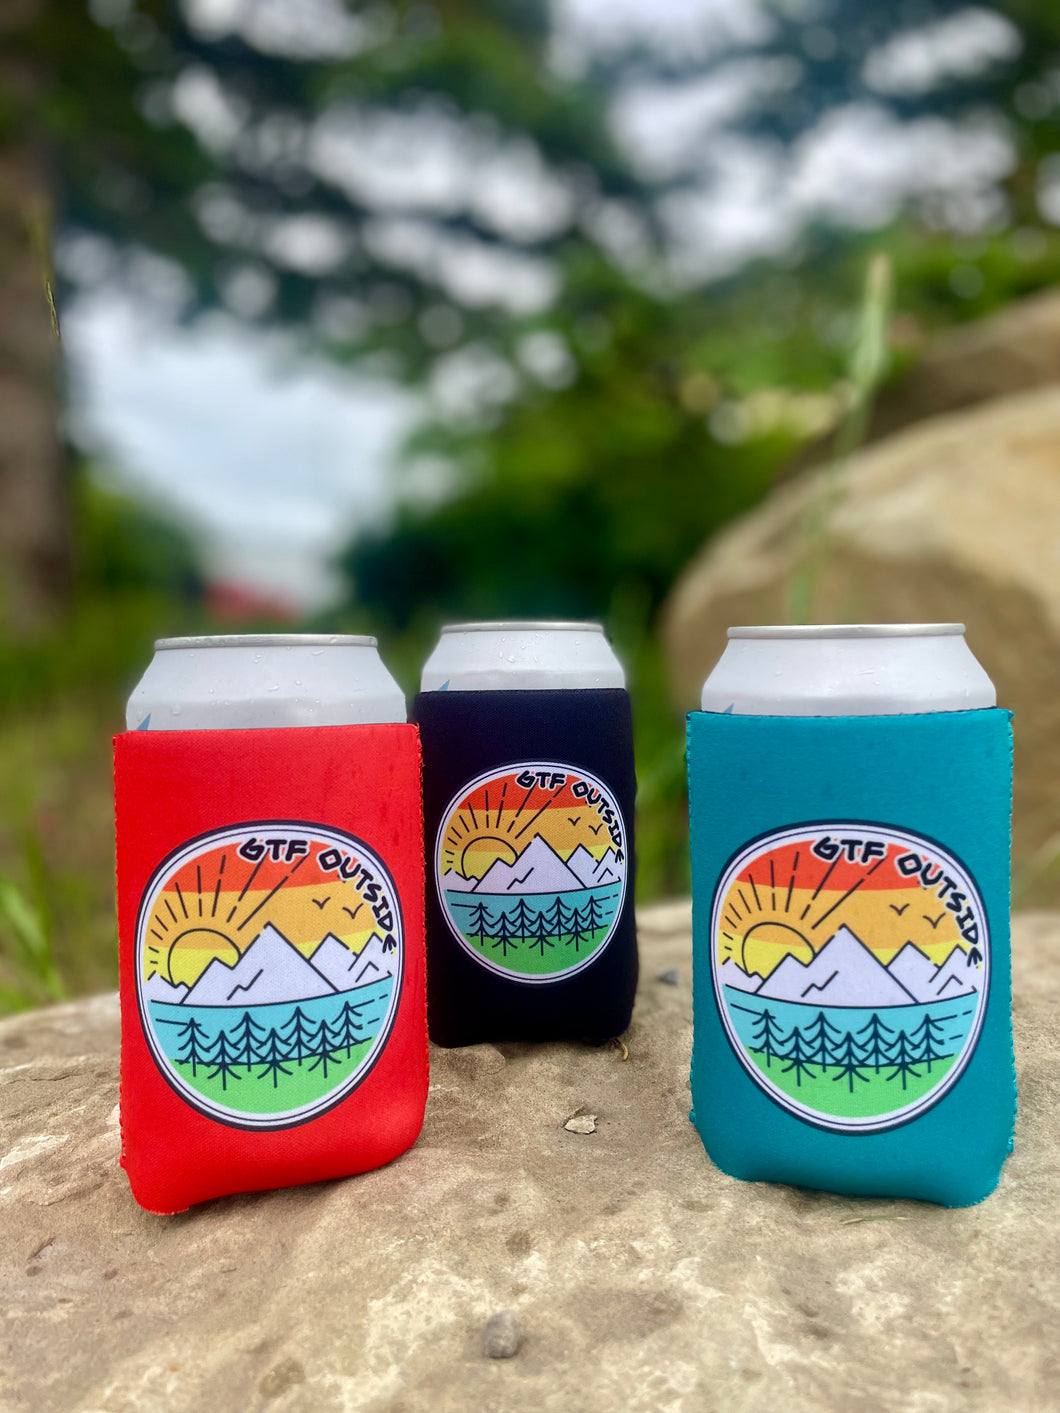 tangerine, black and teal drink koozies. gtf outside. sunrise logo with sun, trees and mountains. 